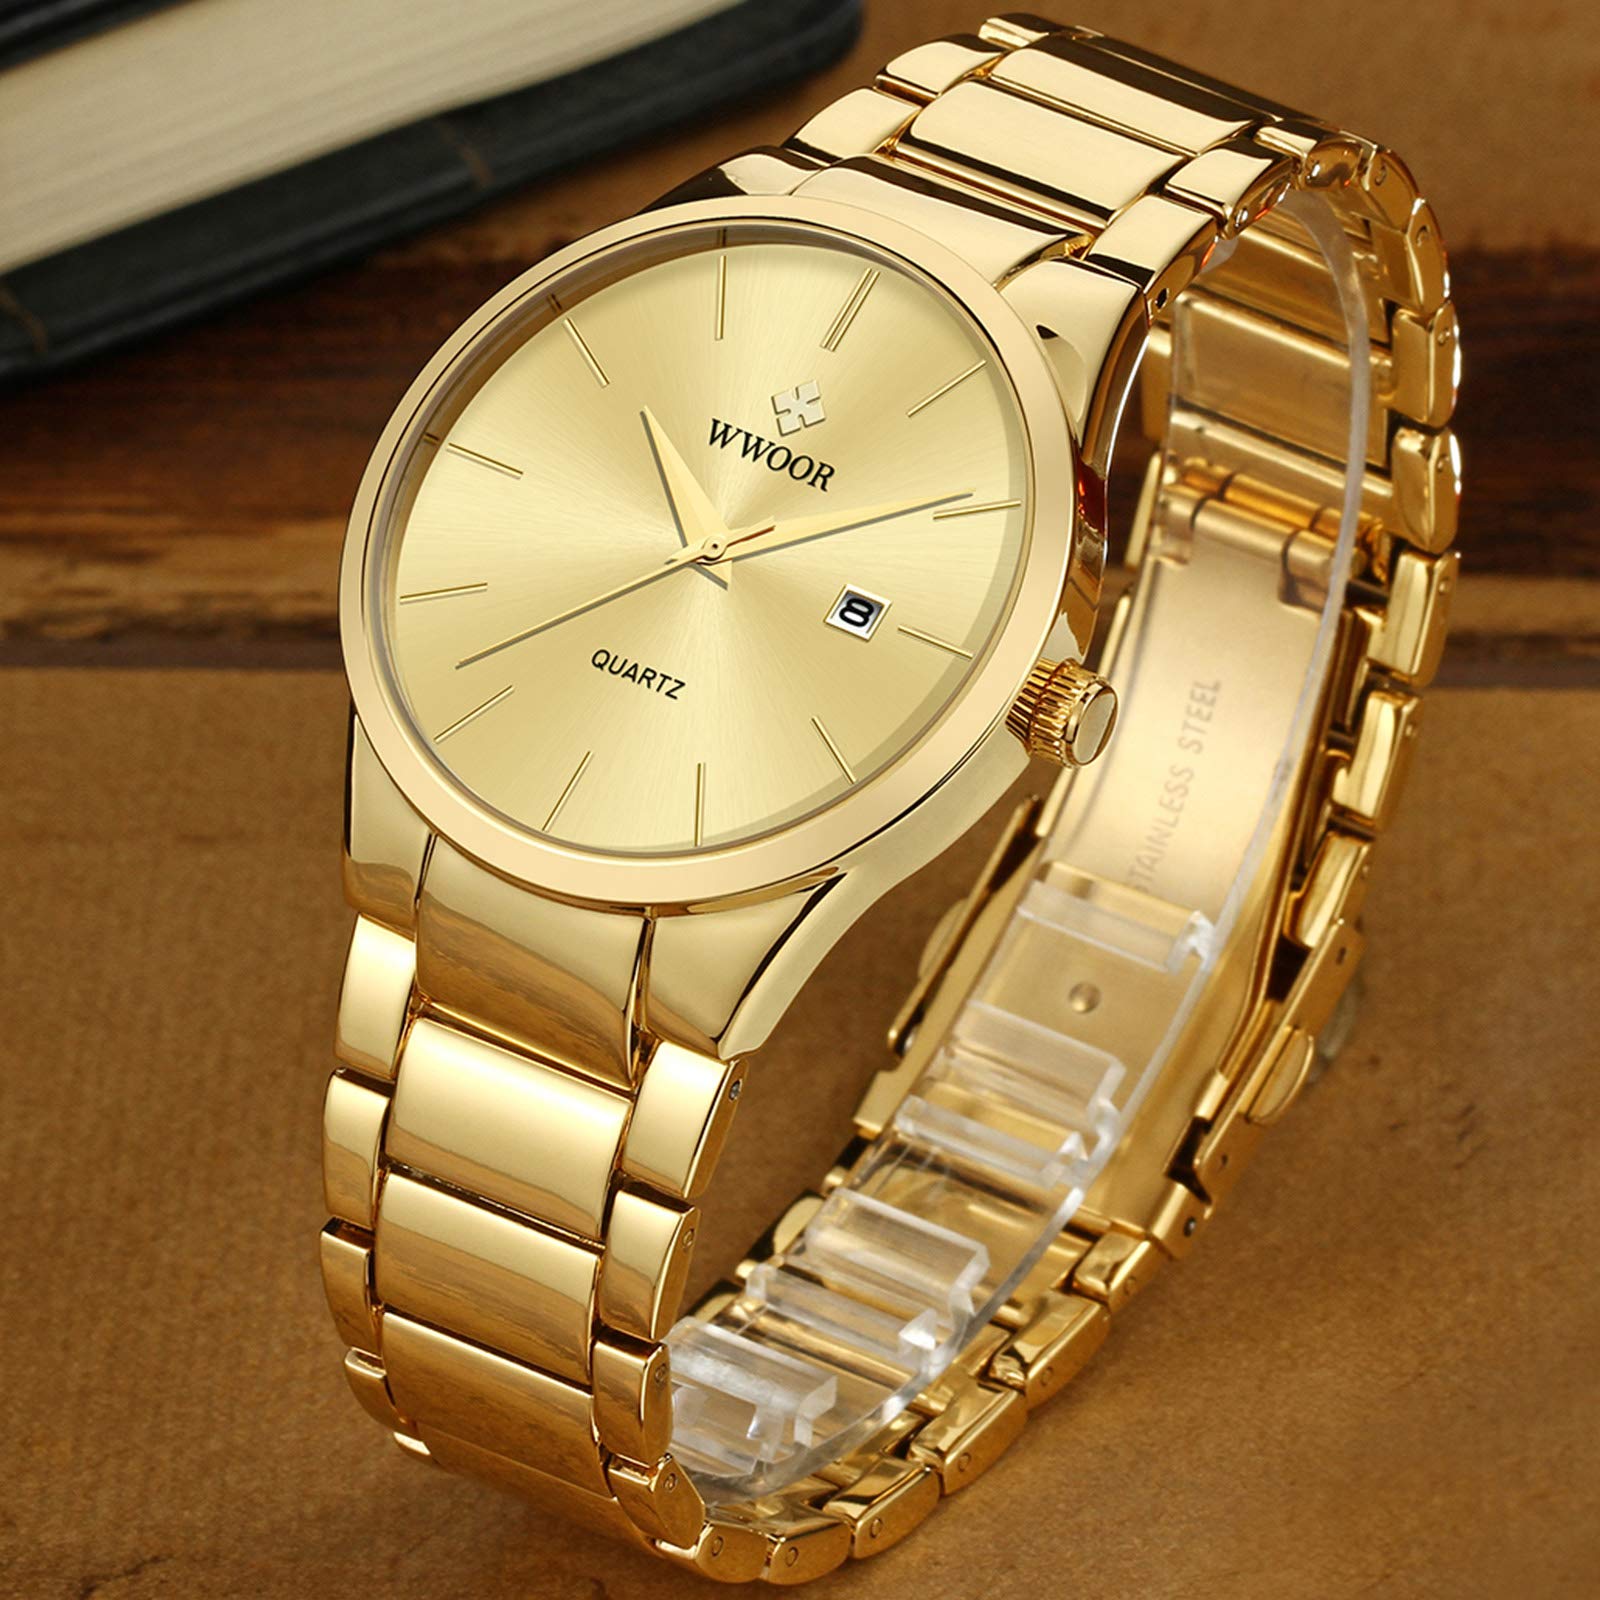 WWOOR Square Watches for Men and Women and Gold Watches for Men